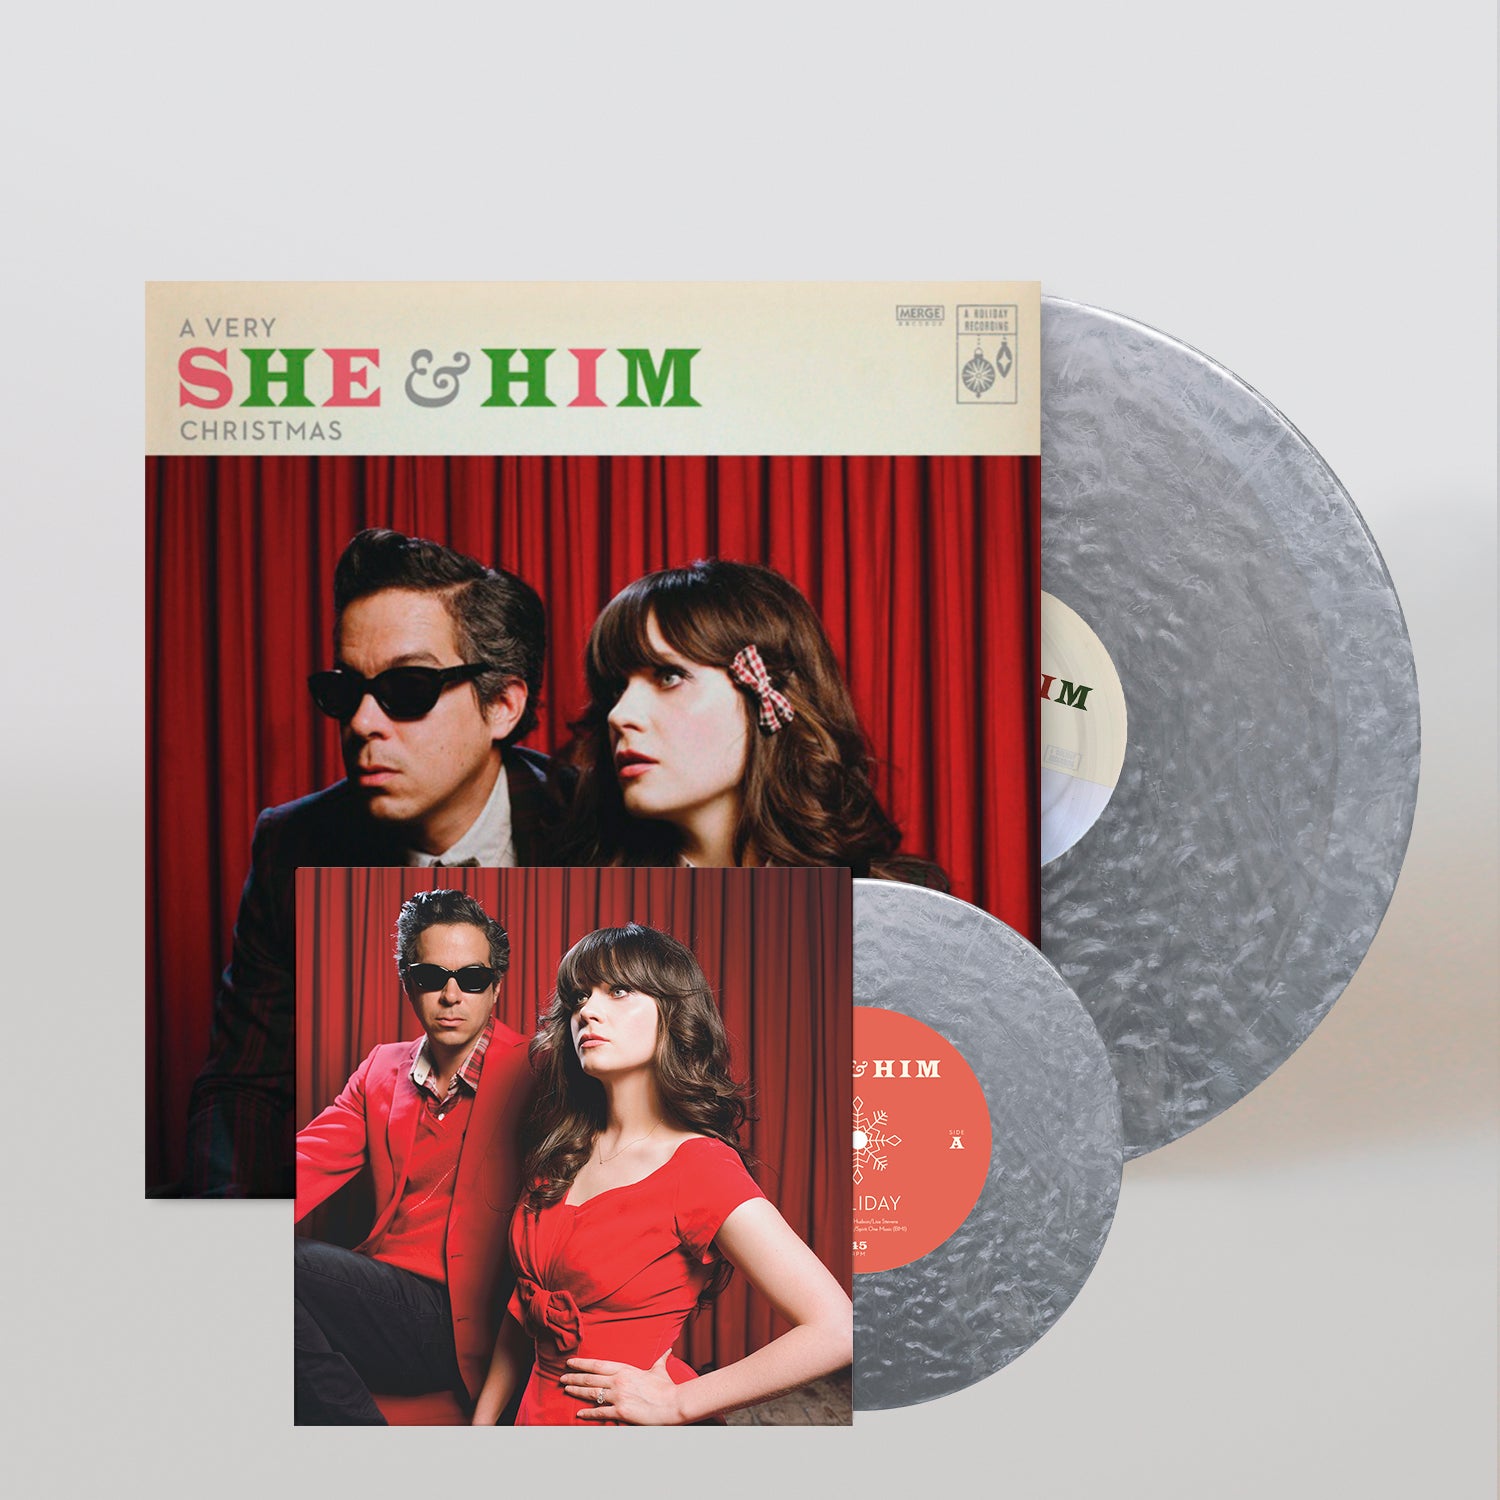 She & Him | A Very She & Him Christmas (10th Anniv Deluxe Ed) (With Bonus 7" Silver vinyl Download Card) | Vinyl